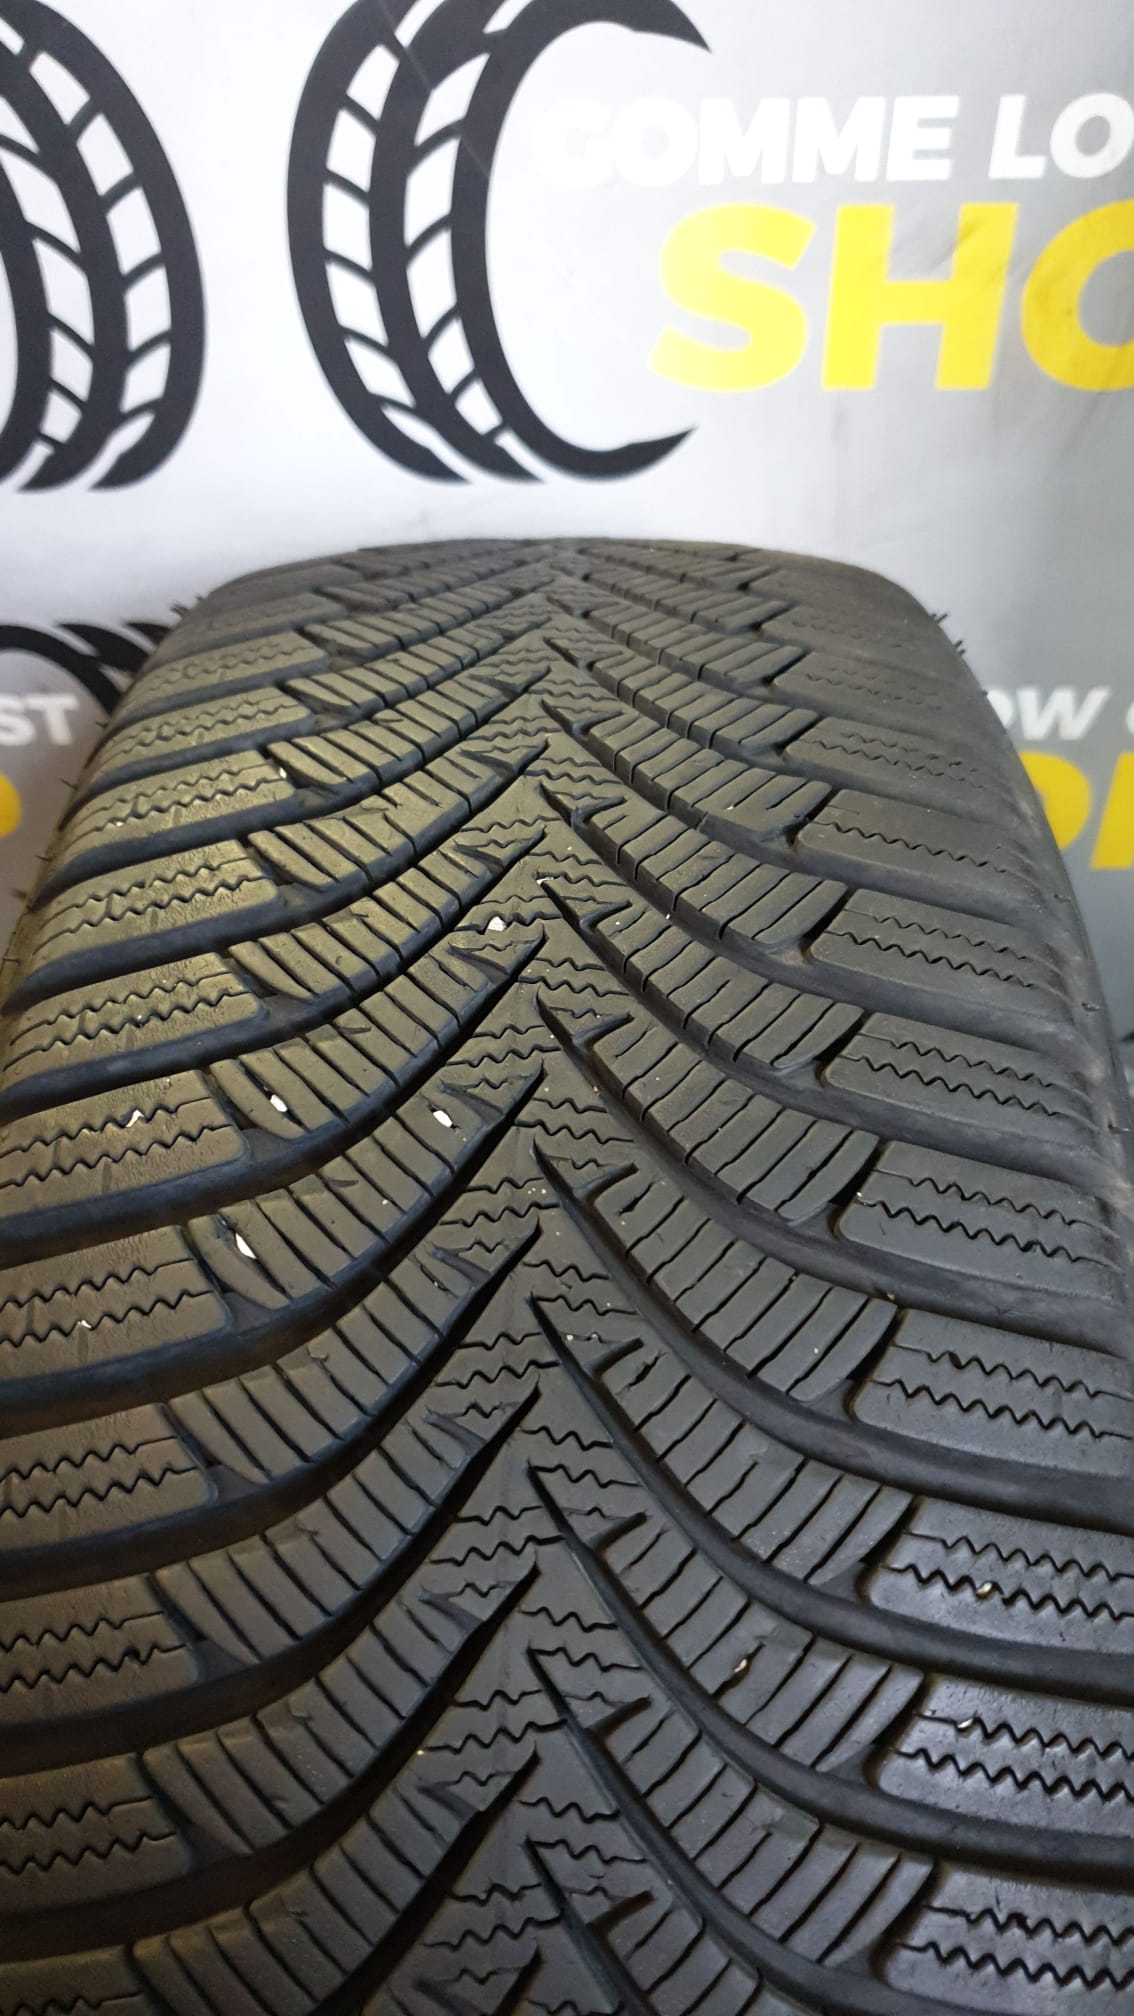 PNEUMATICI USATI – 205 55 R 16 – 94 – H – HANKOOK - Gomme Low Cost Shop